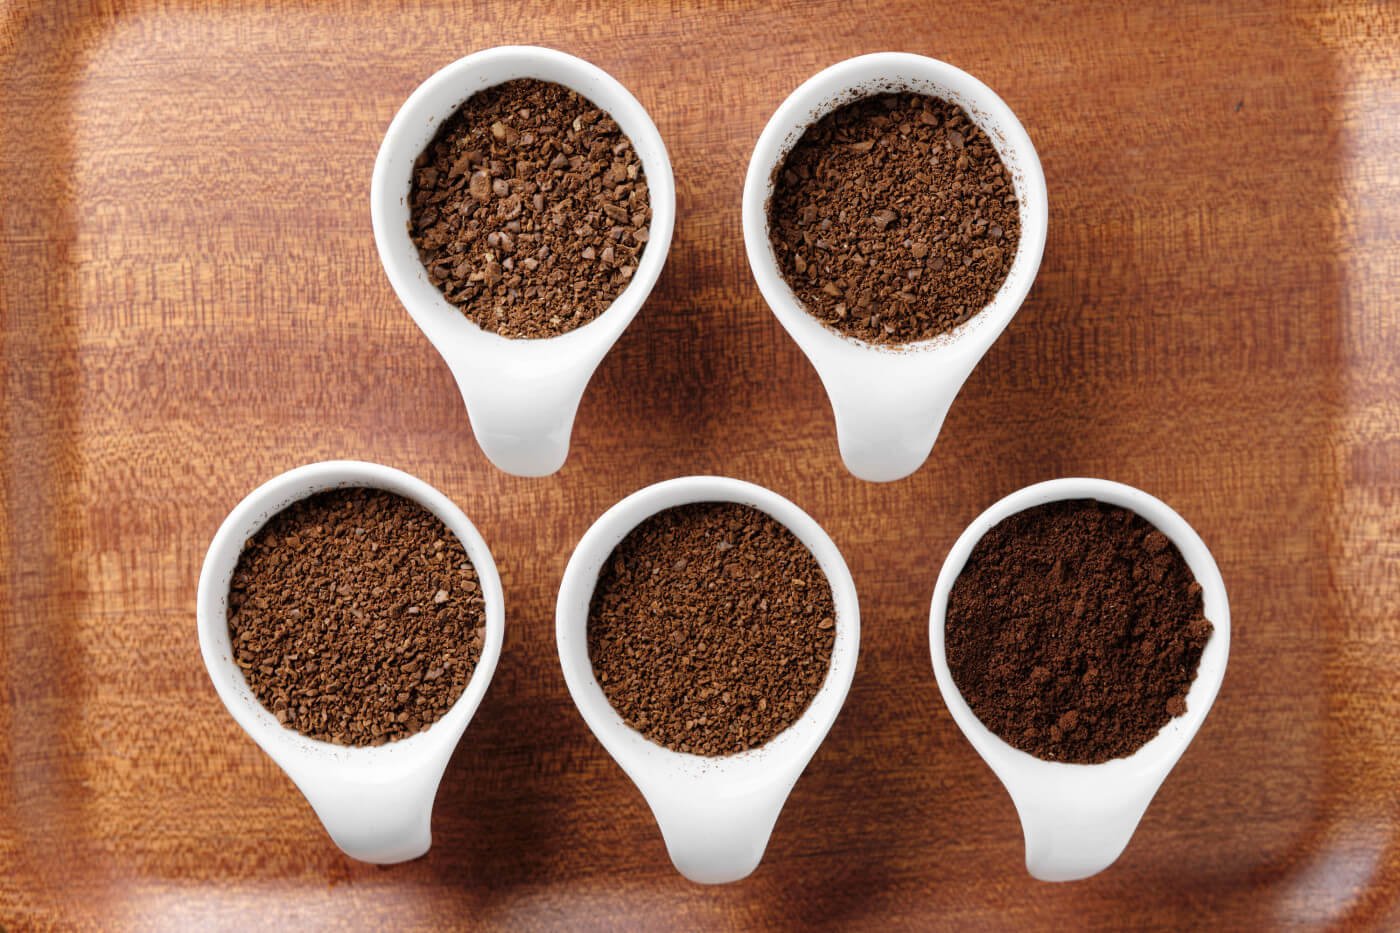 Guide to Coffee Grind Sizes